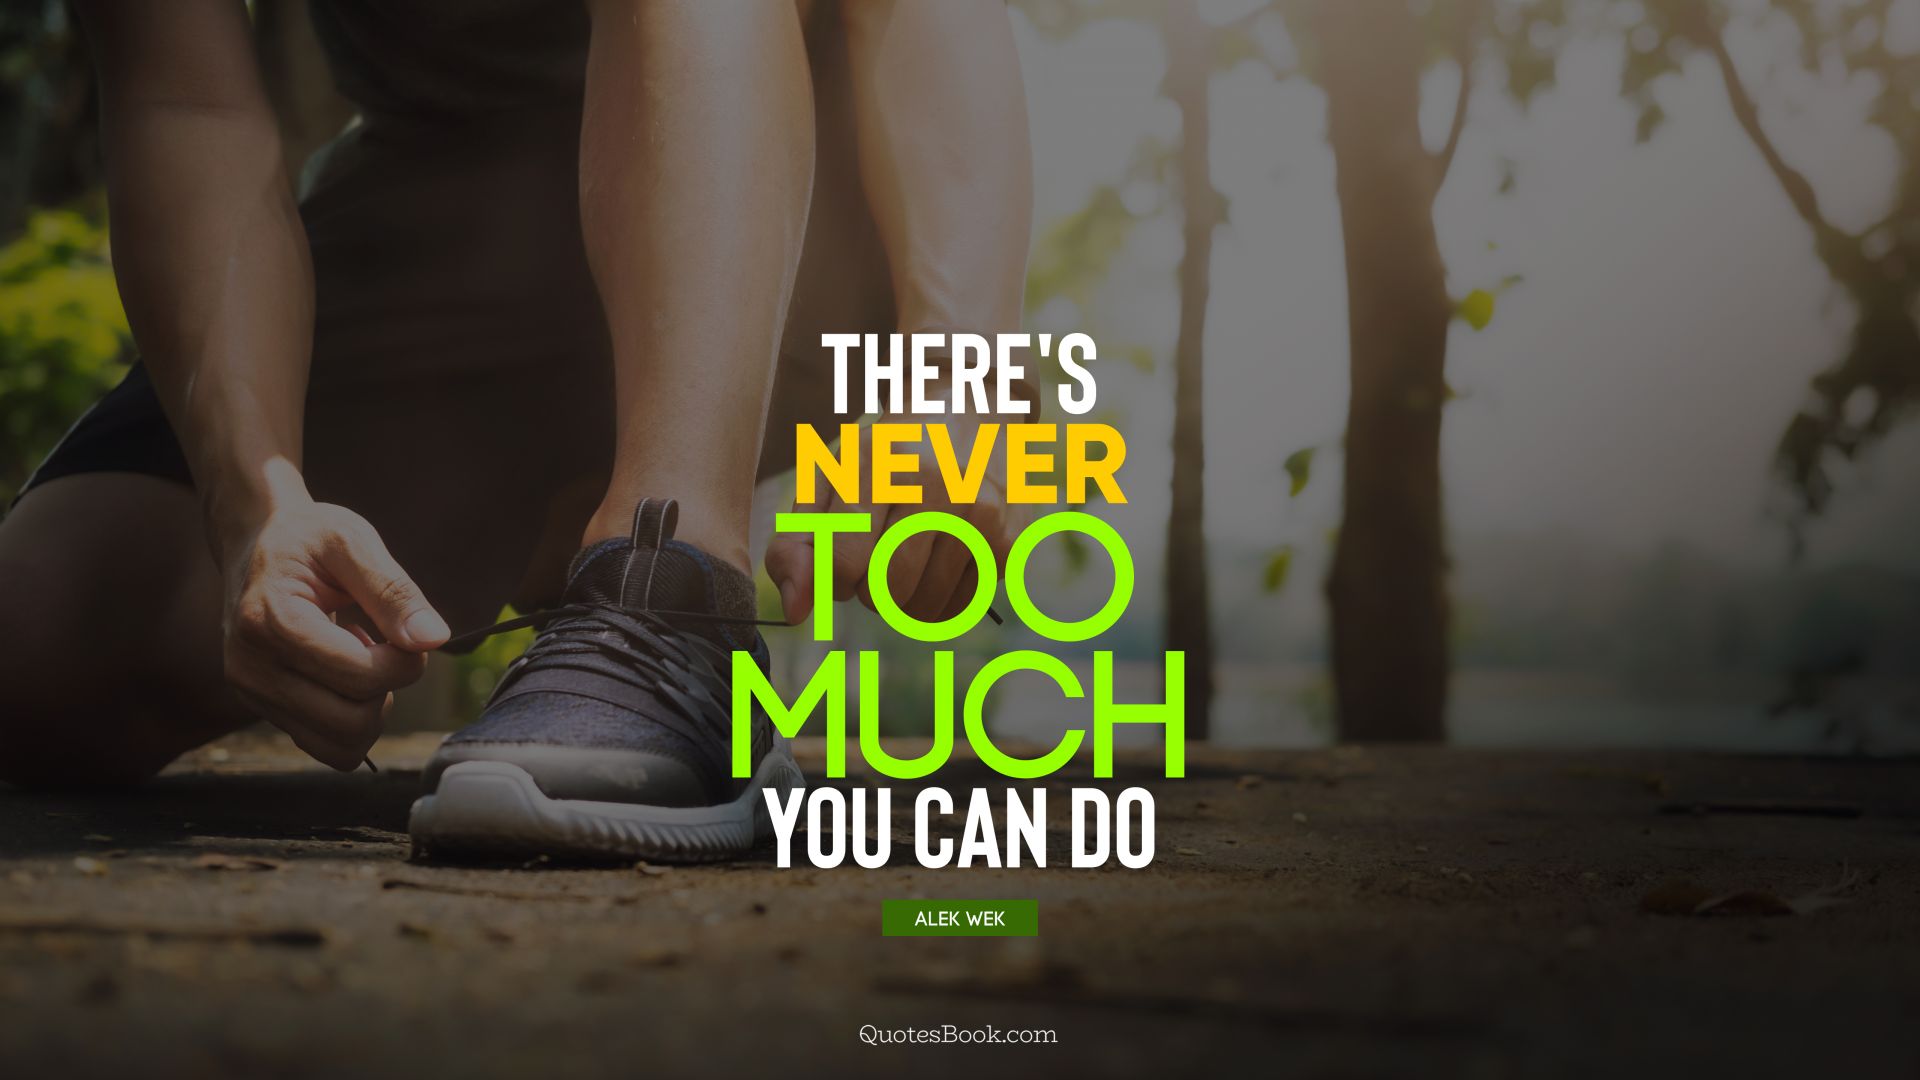 There's never too much you can do. - Quote by Alek Wek